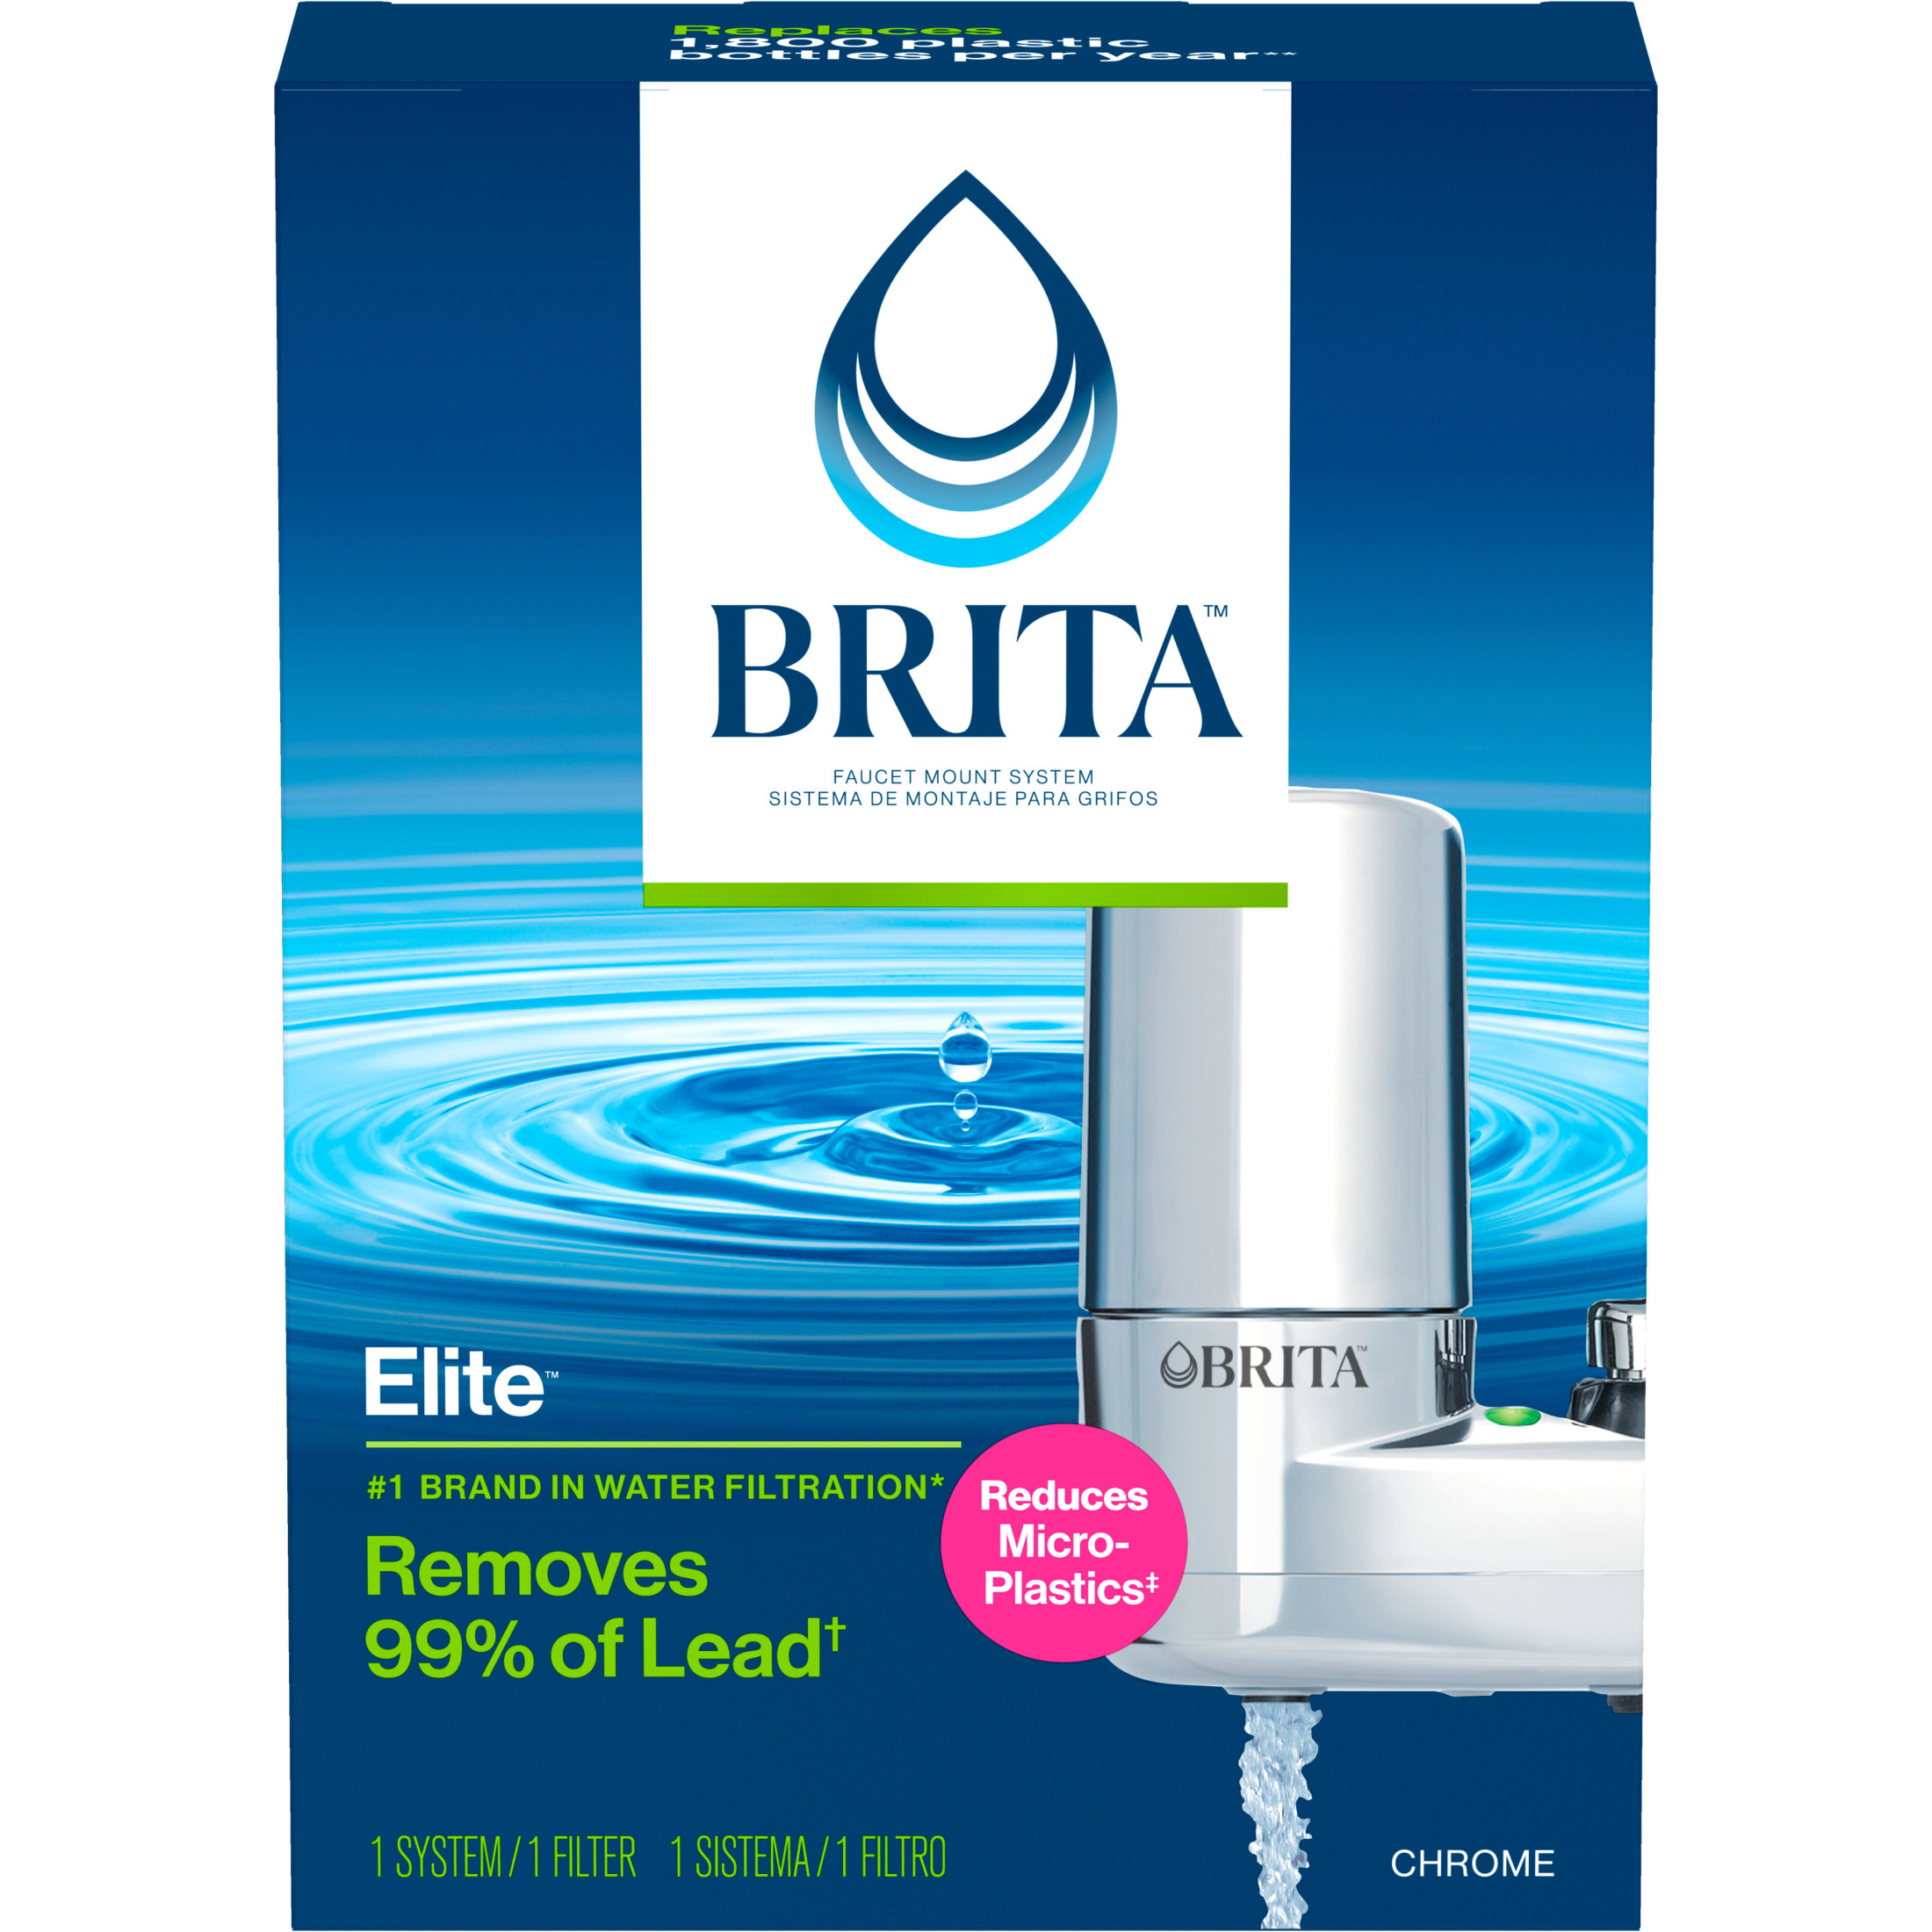 Brita Elite Water Faucet Filtration Mount System, Fits Standard Faucets, Chrome, Includes 1 Filter - image 3 of 9